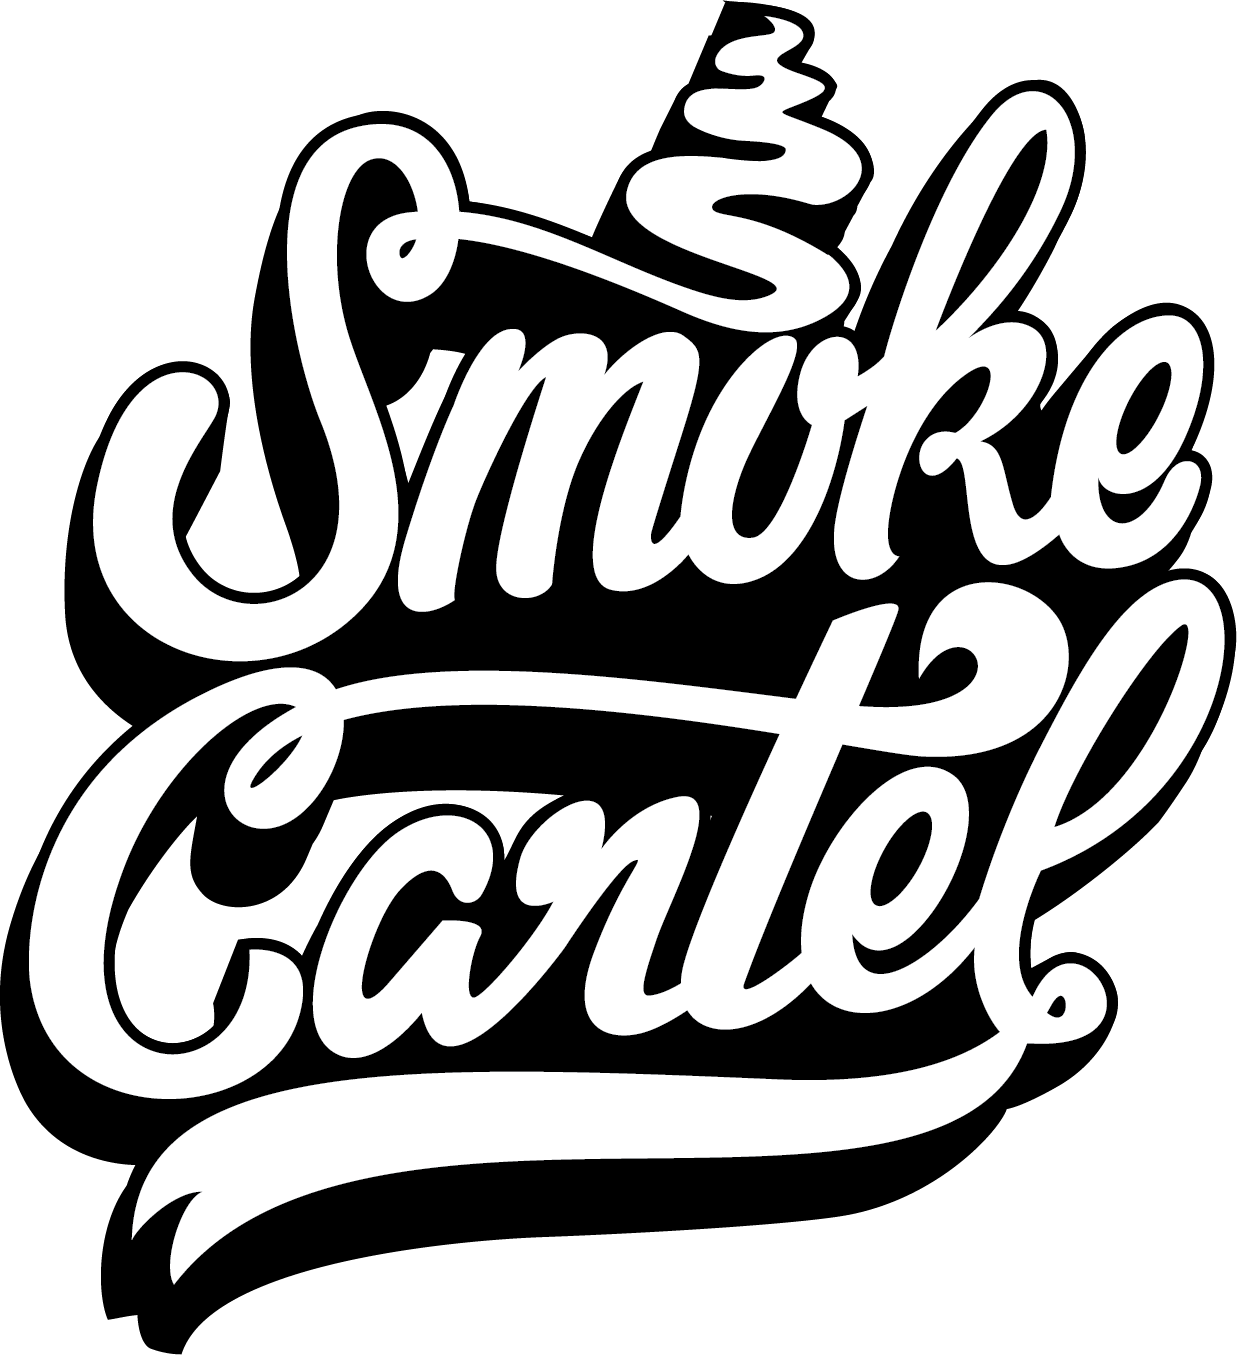 http://cdn.shopify.com/s/files/1/0350/8253/t/6/assets/smokecartel-online-headshop-logo-stacked.png